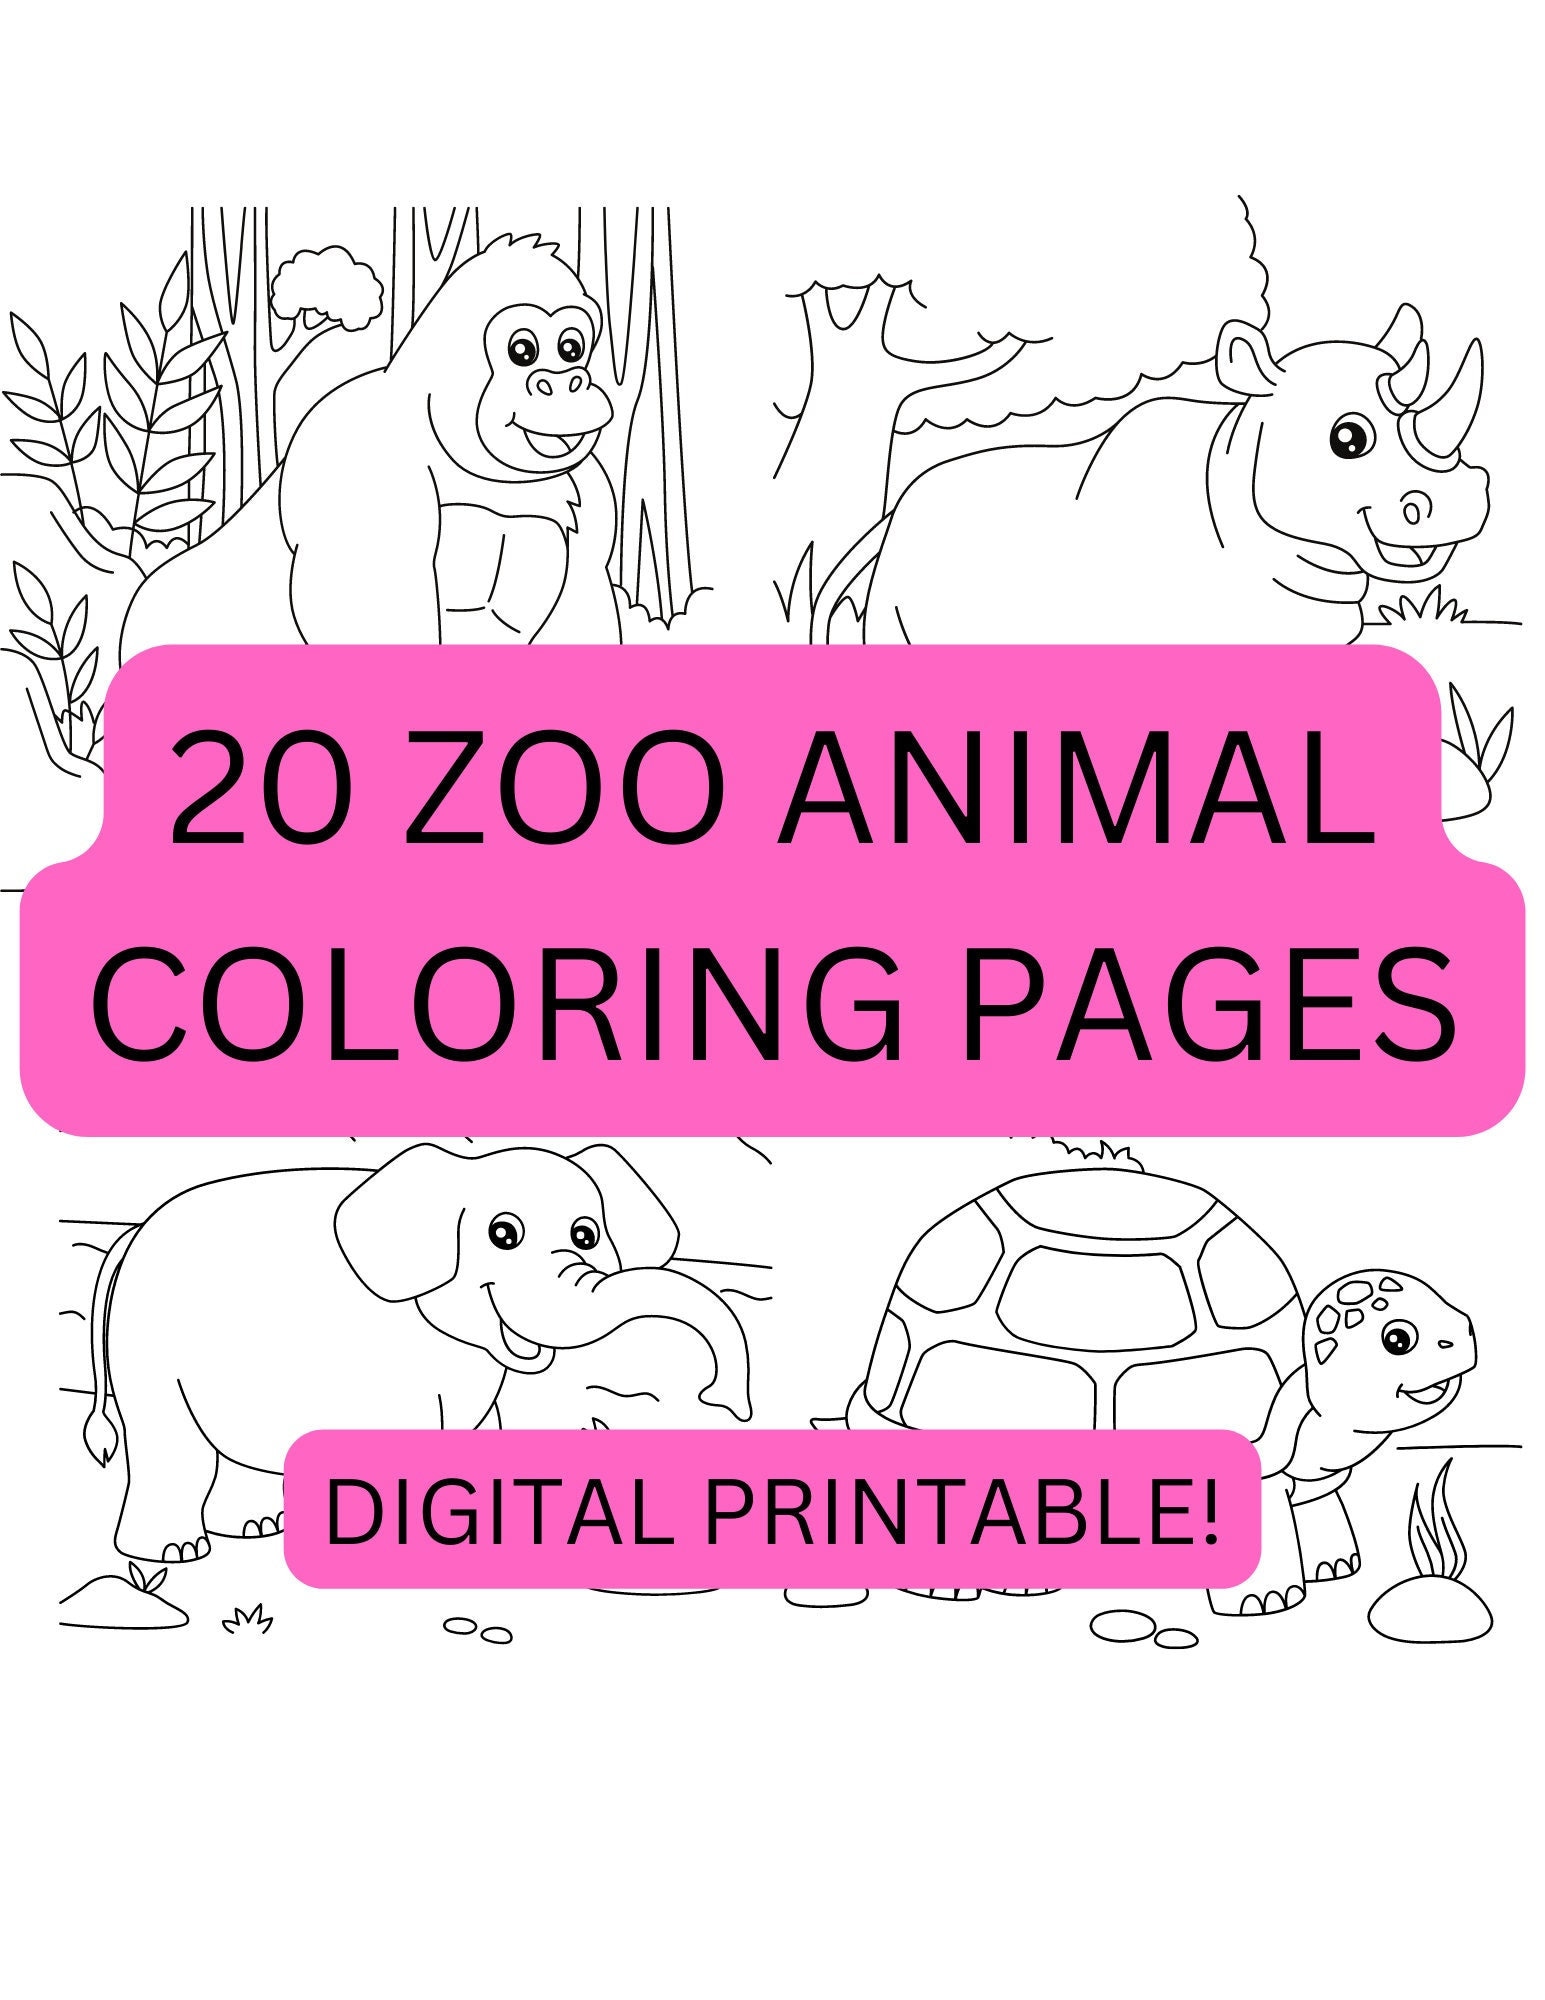 Printable zoo animal coloring pages for kids to color digital download instant download